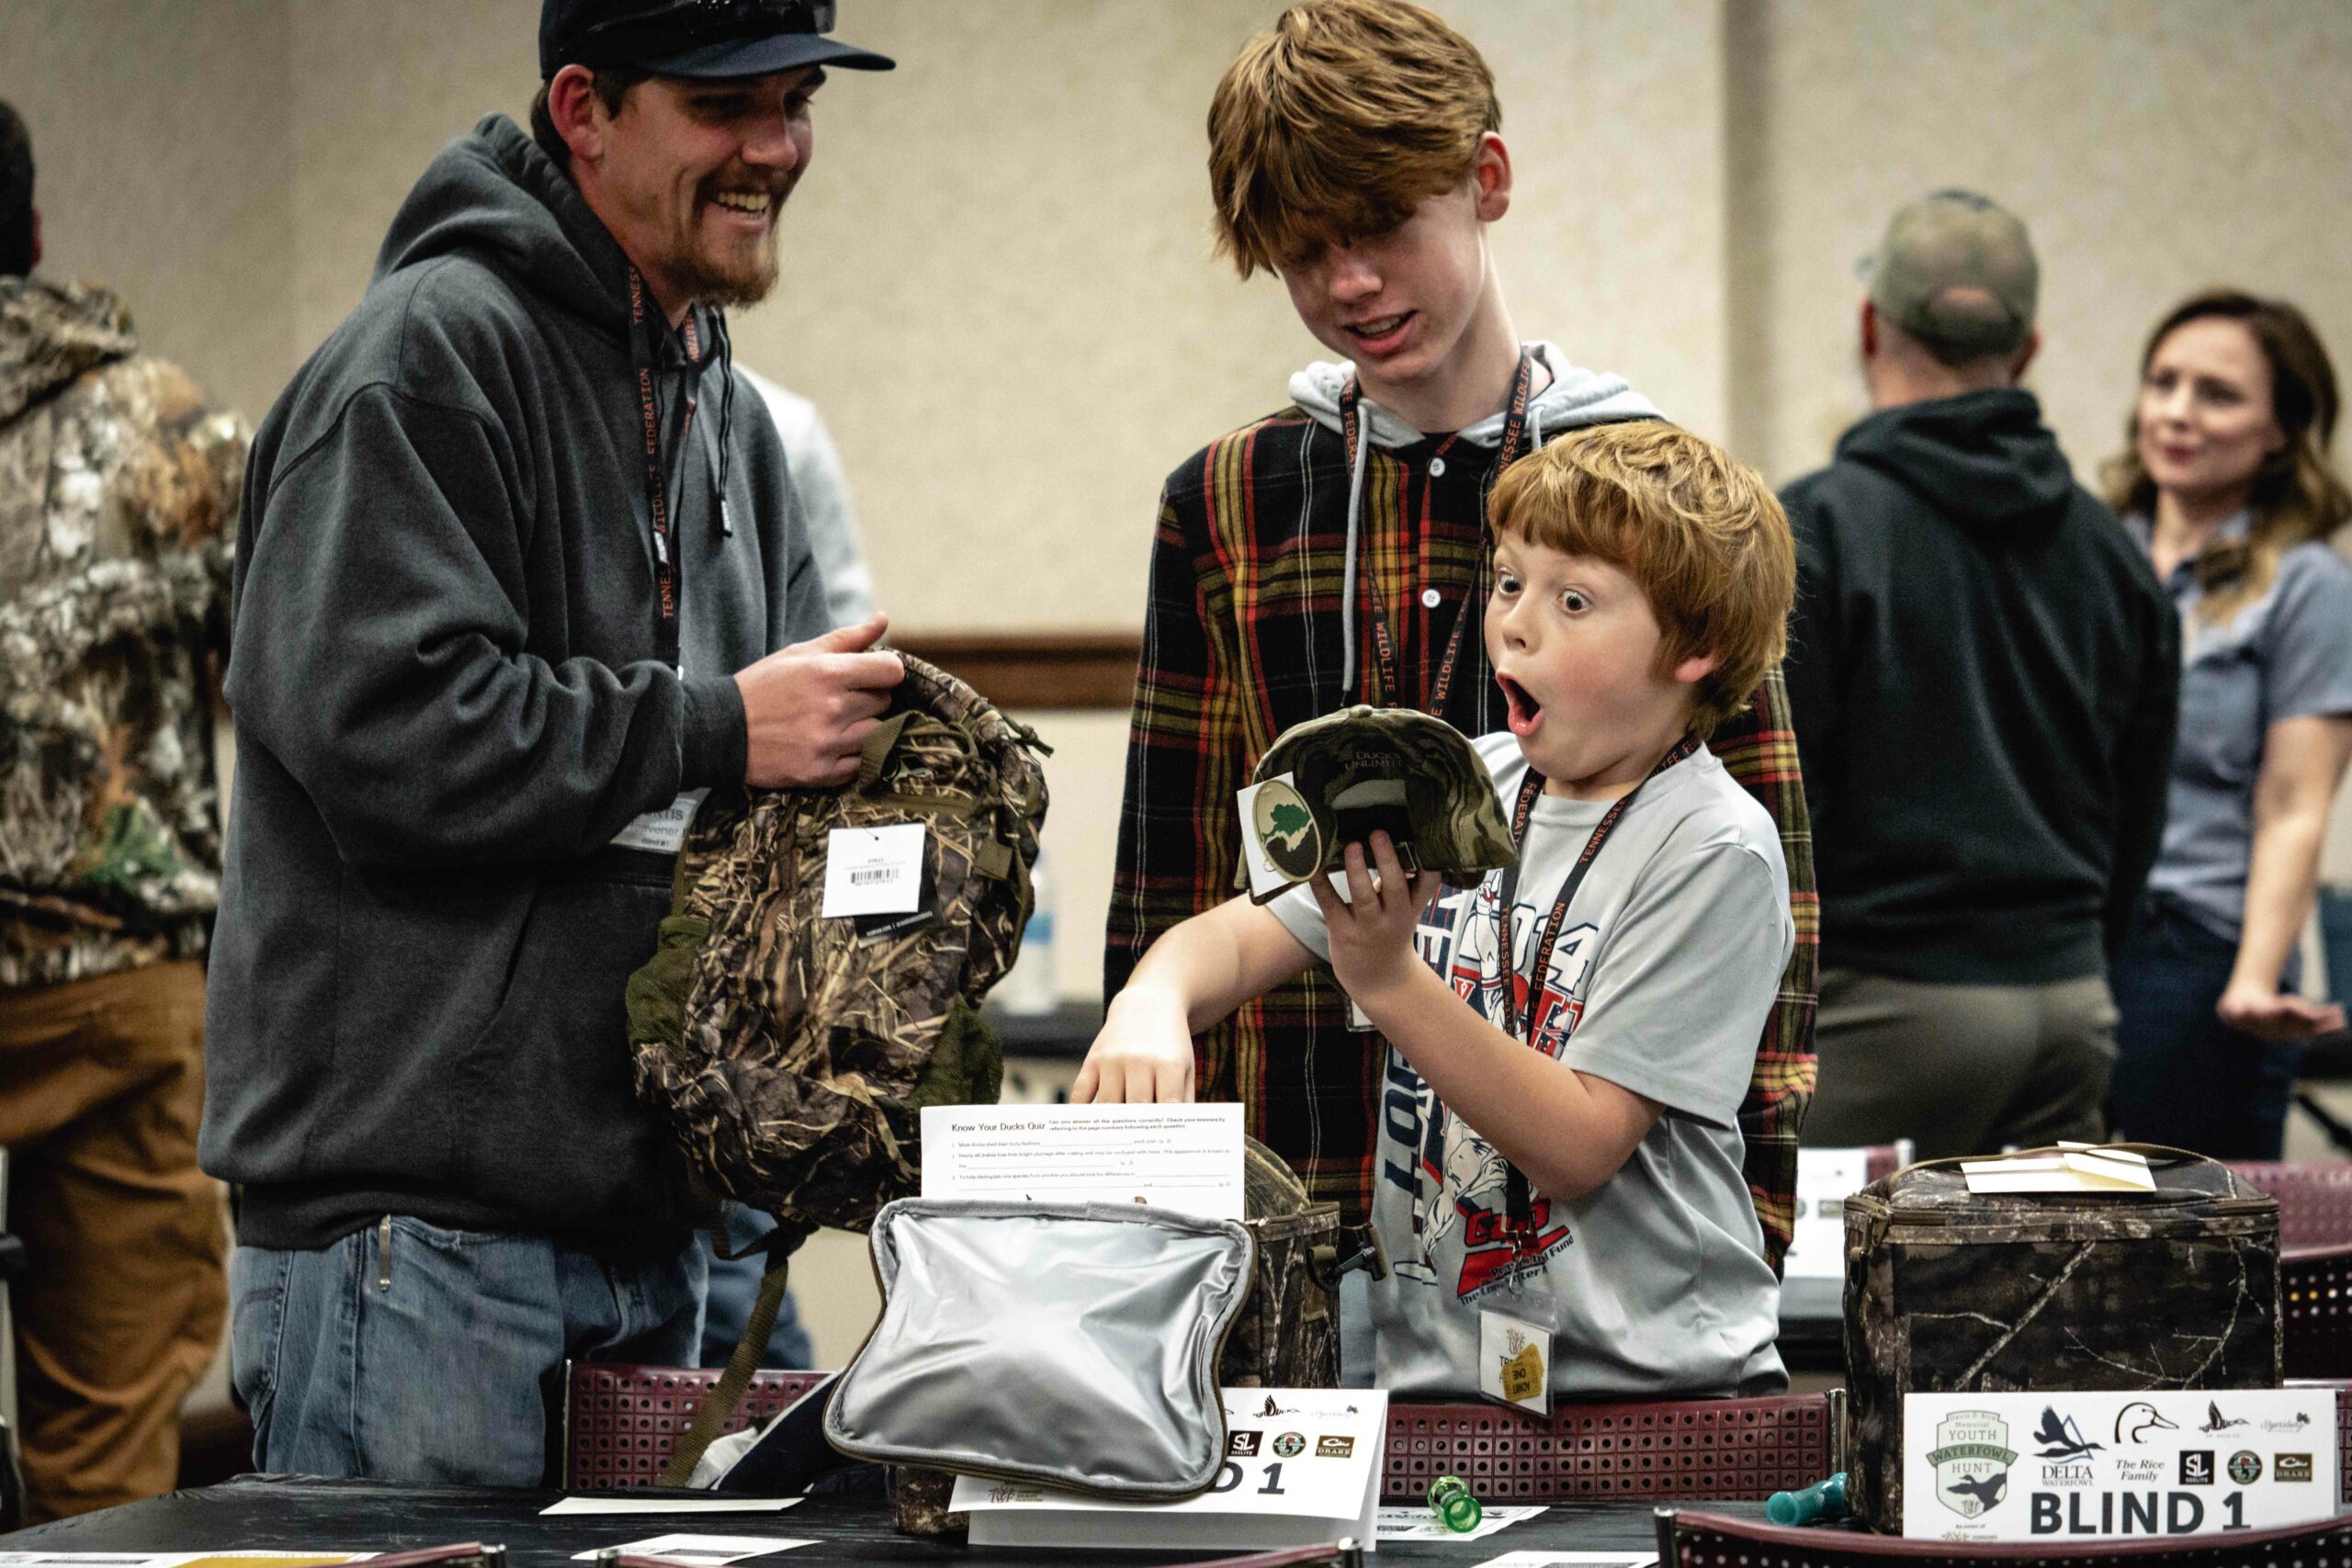 Excited Youth at Friday Banquet Opens Prizes from Delta Waterfowl.